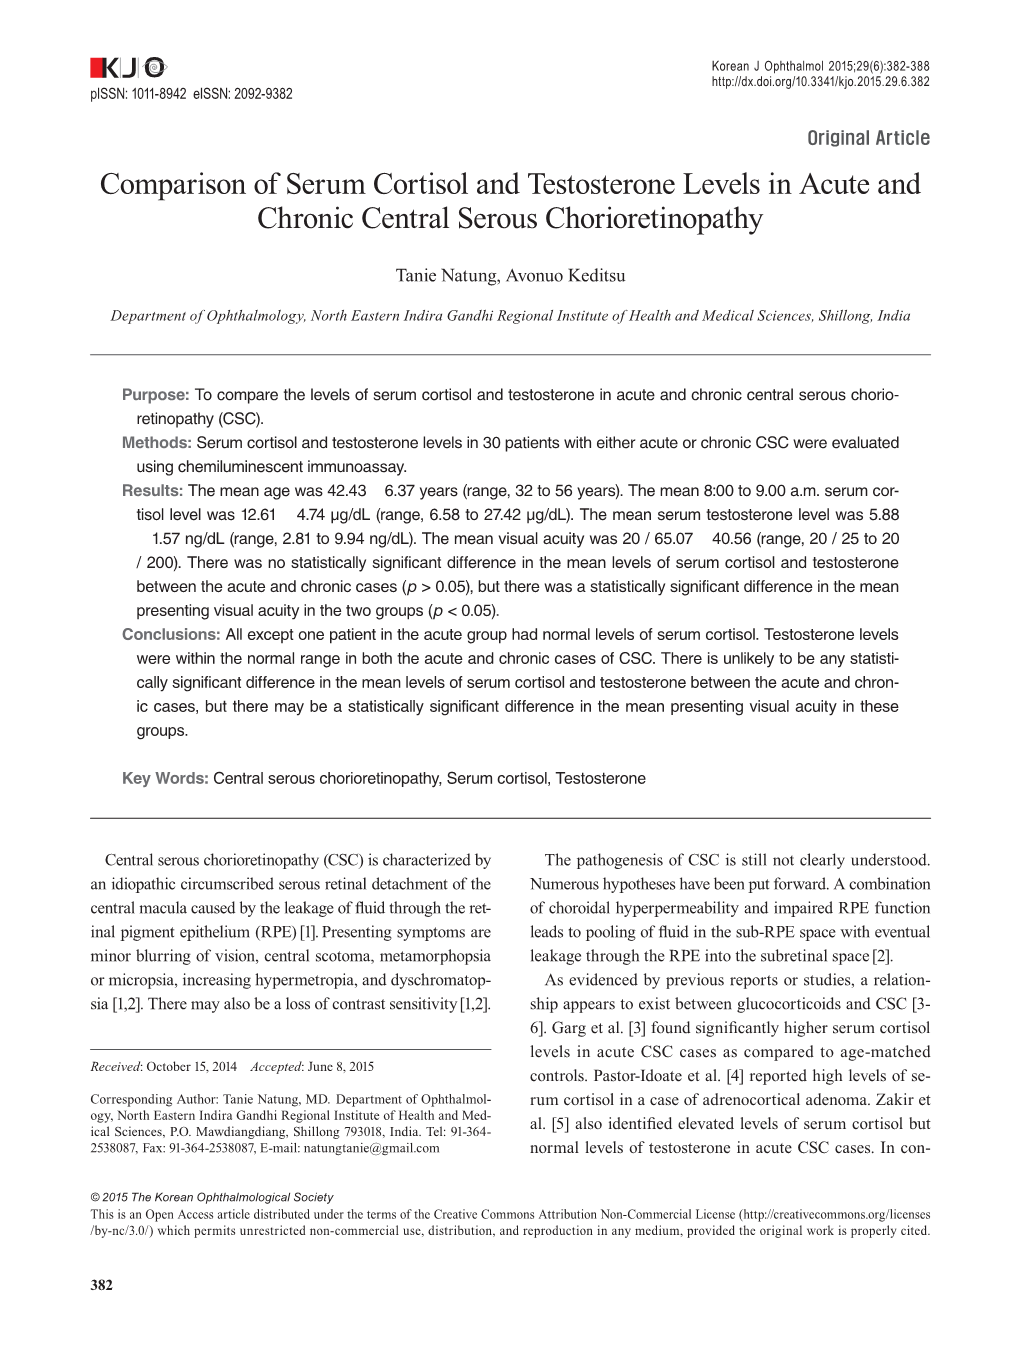 Comparison of Serum Cortisol and Testosterone Levels in Acute and Chronic Central Serous Chorioretinopathy